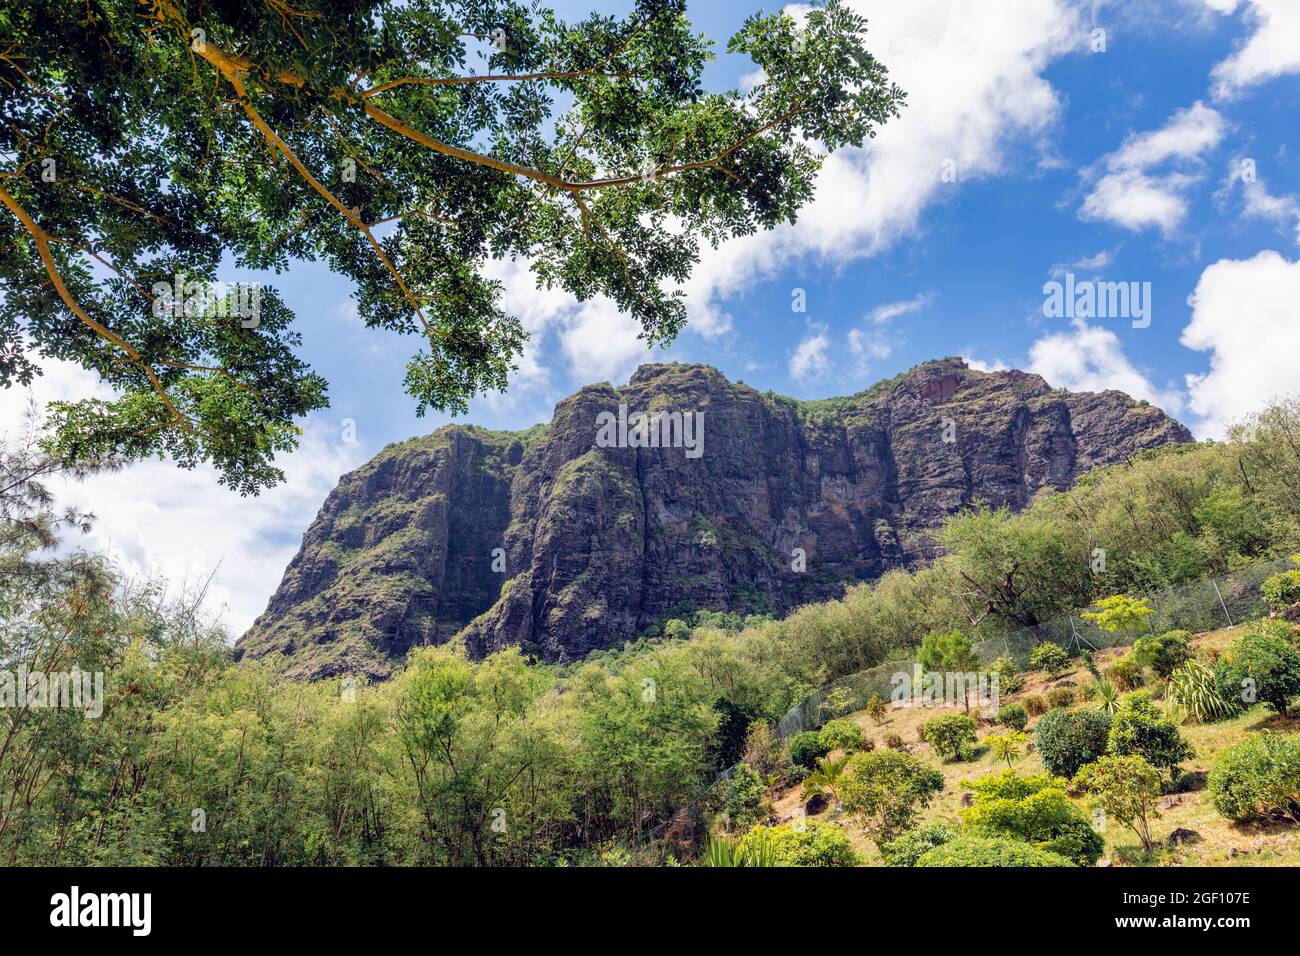 Mauritius, Mascarene Islands.  Le Morne Brabant mountain.  The mountain was used as a haven by escaped slaves. The Le Morne Cultural Landscape is a UN Stock Photo